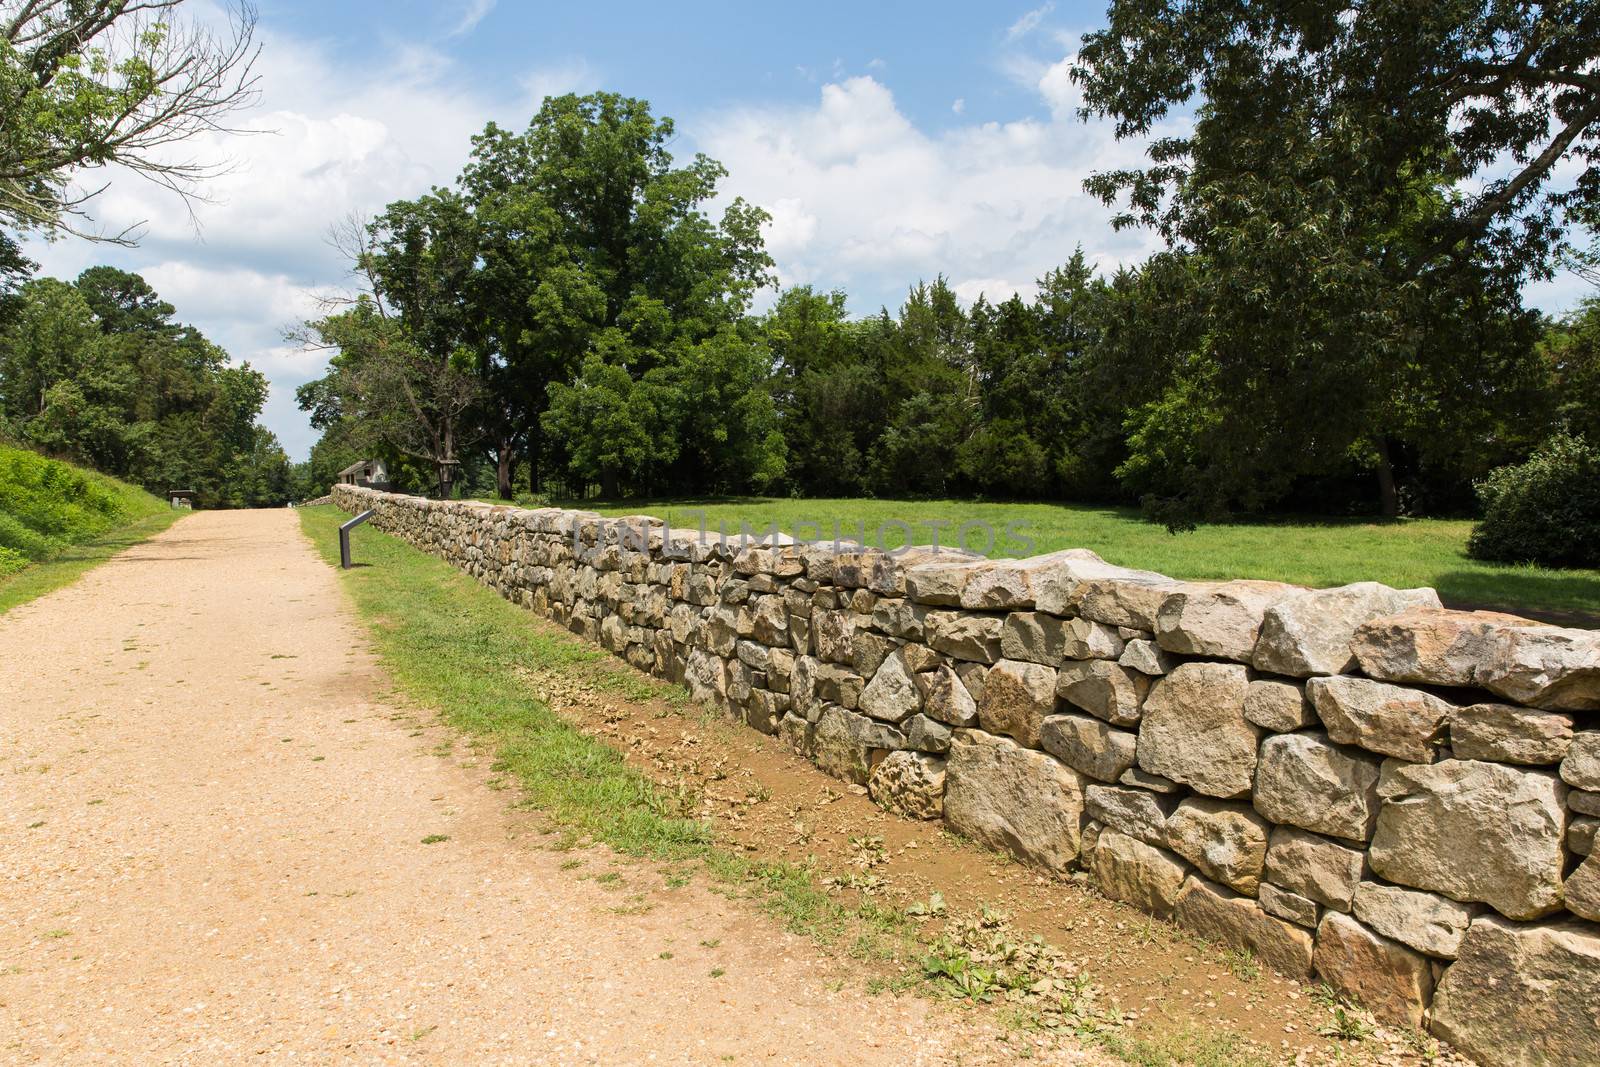 This is the sunken road and a re-creation of the rock wall used by the confederates to defeat the Union Army in 1862.